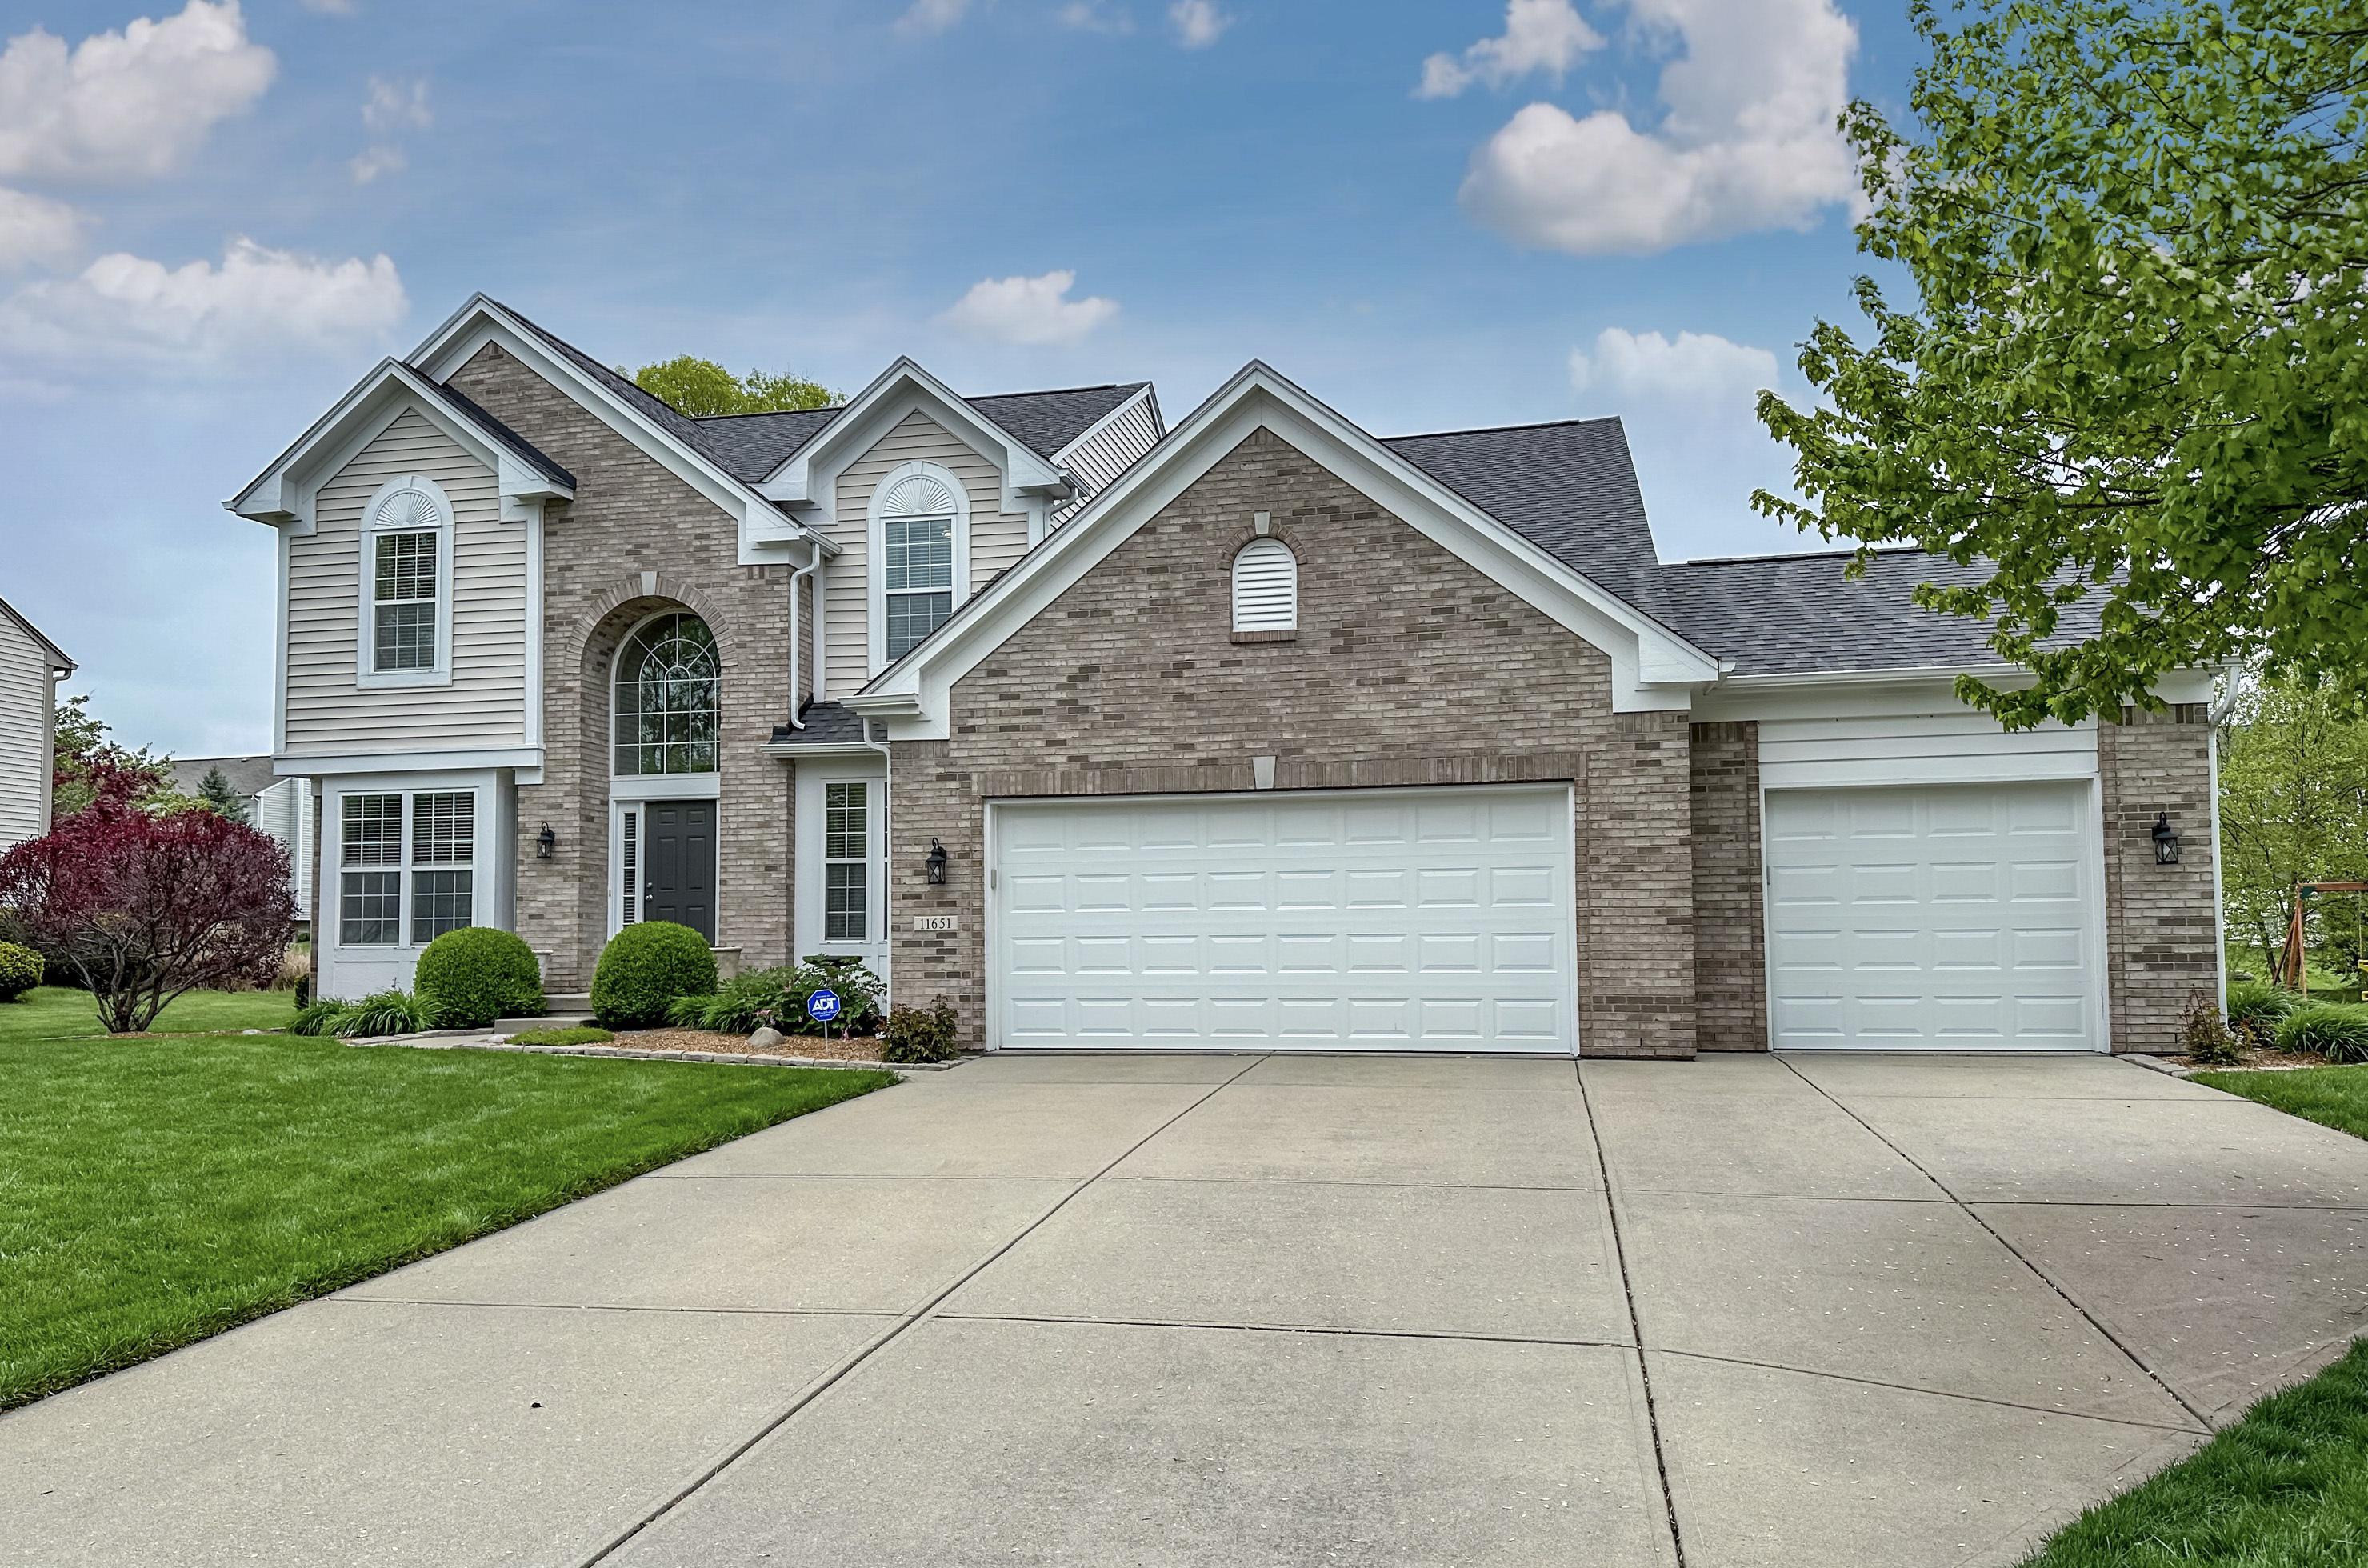 Photo one of 11651 Casco Ct Fishers IN 46037 | MLS 21975918